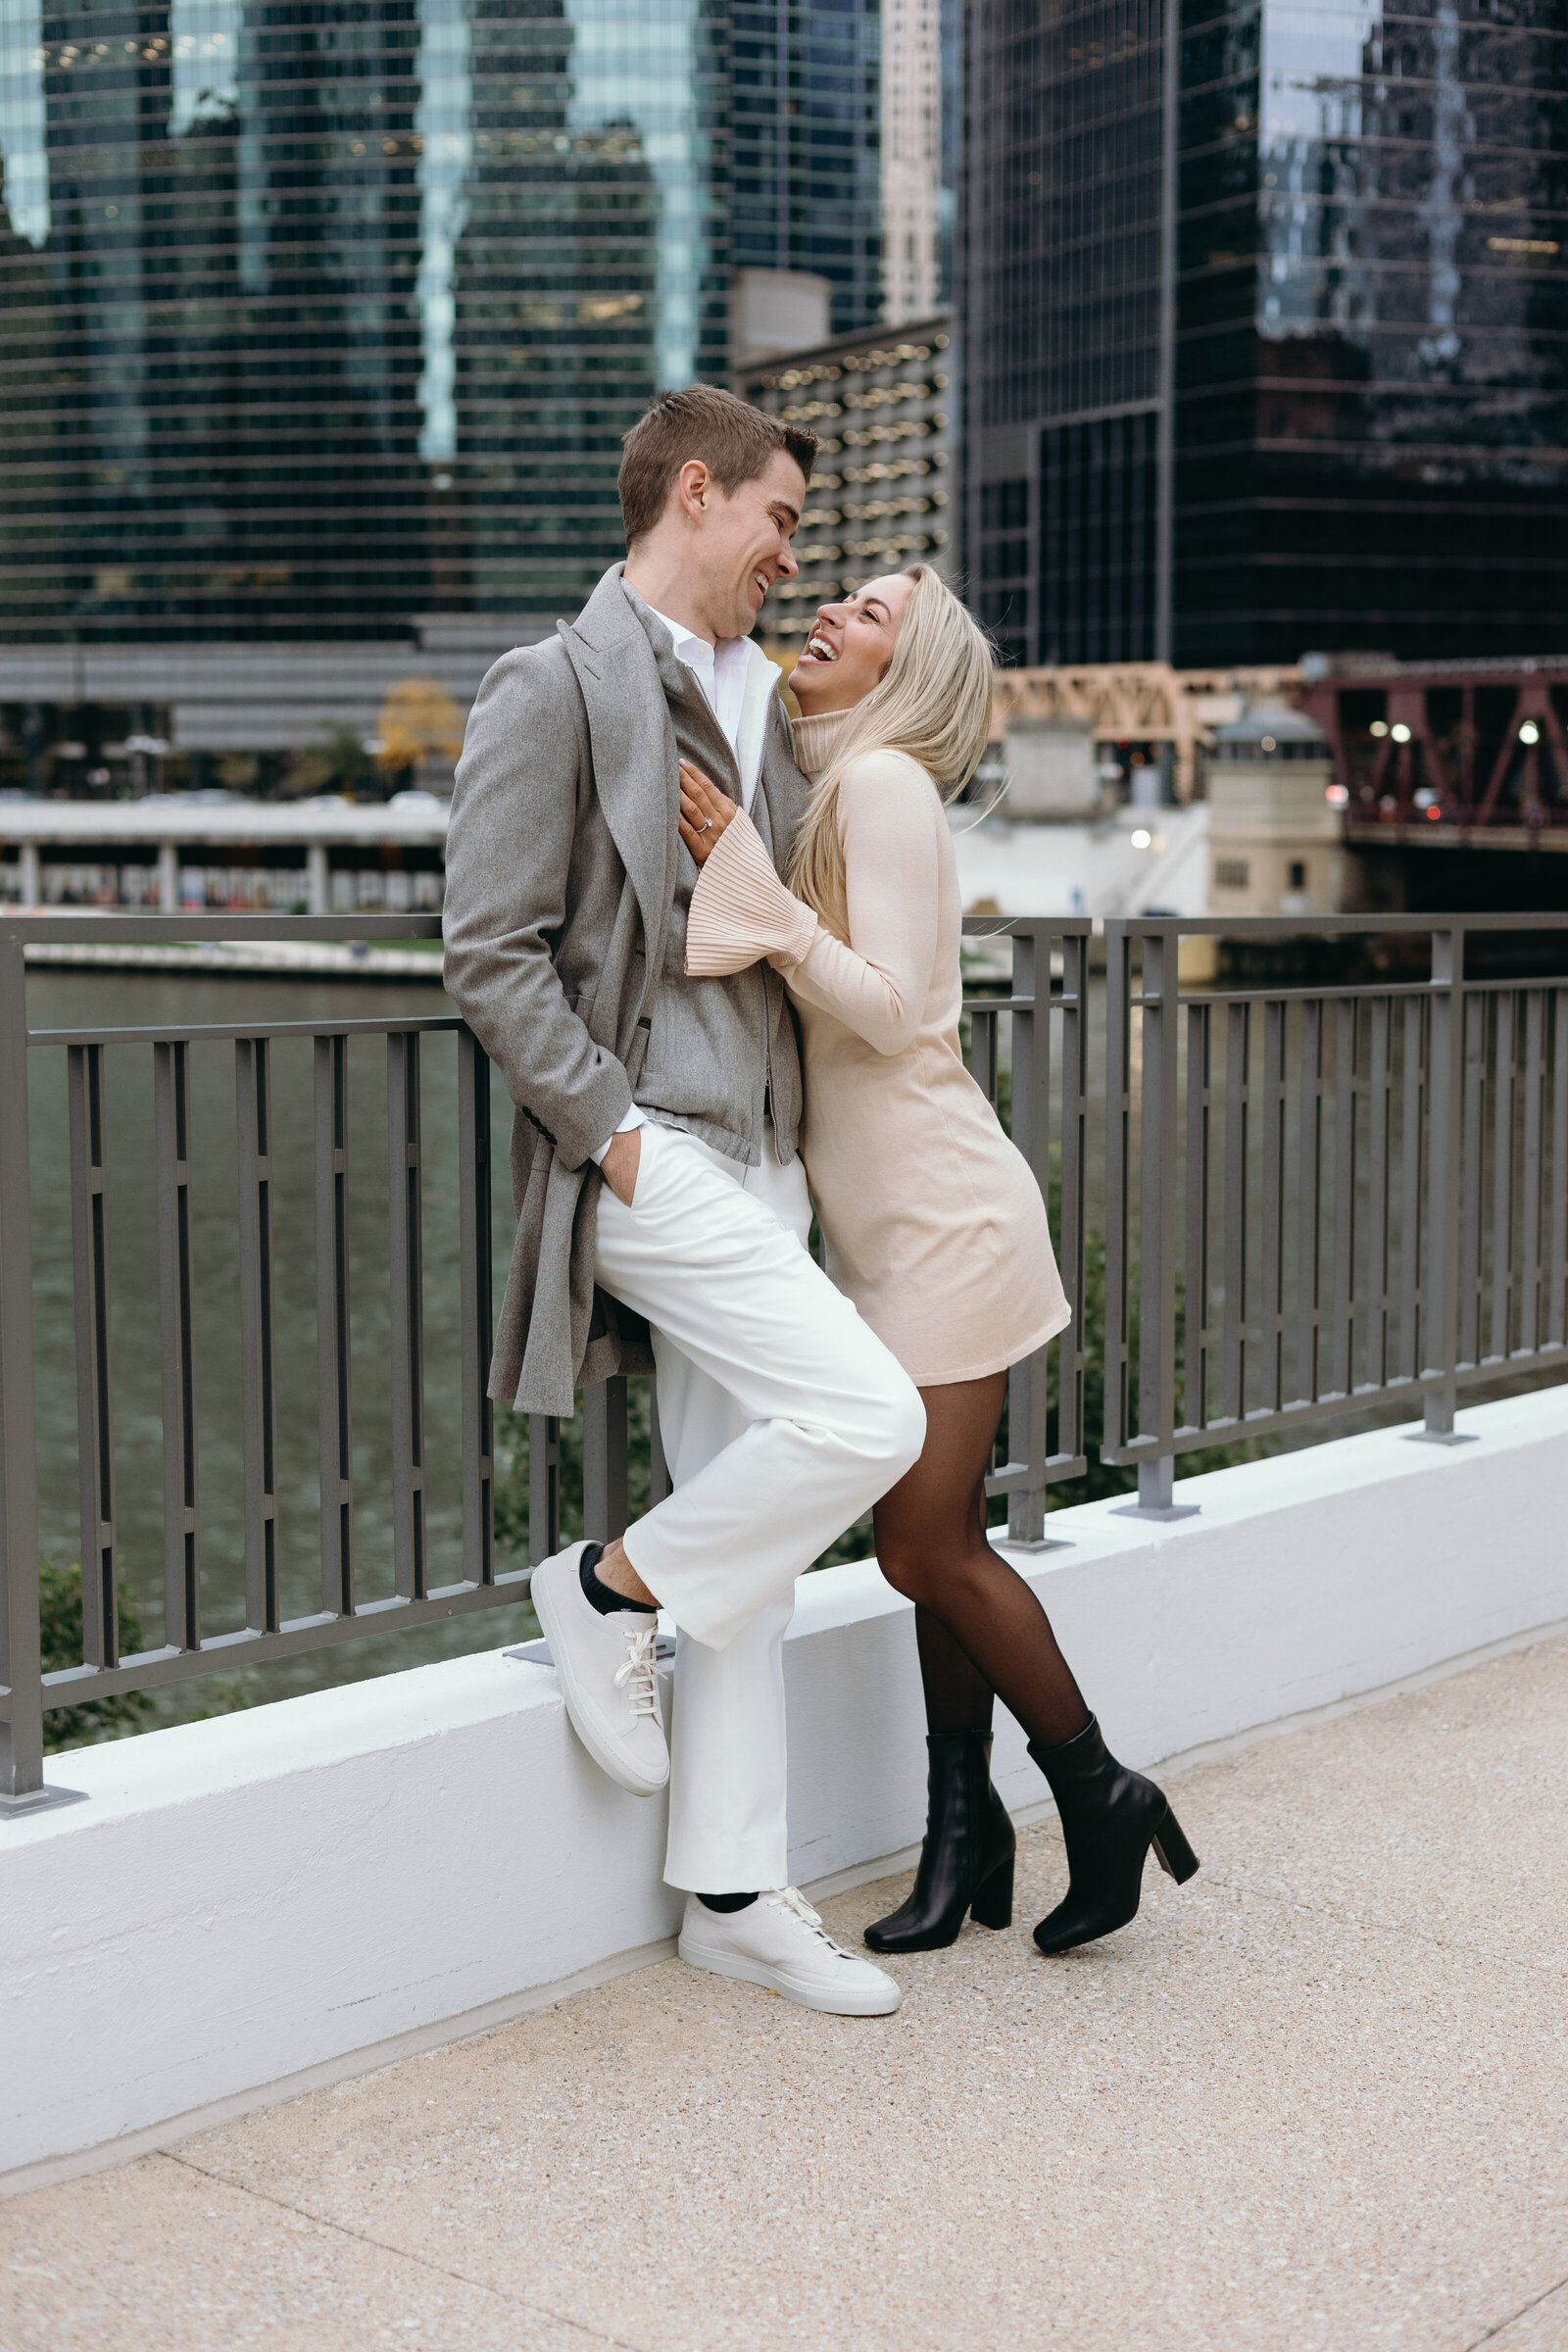 Z Photo and Film - Cody and Silvana's Chicago Engagement Shoot - Chicago, Illinois-92